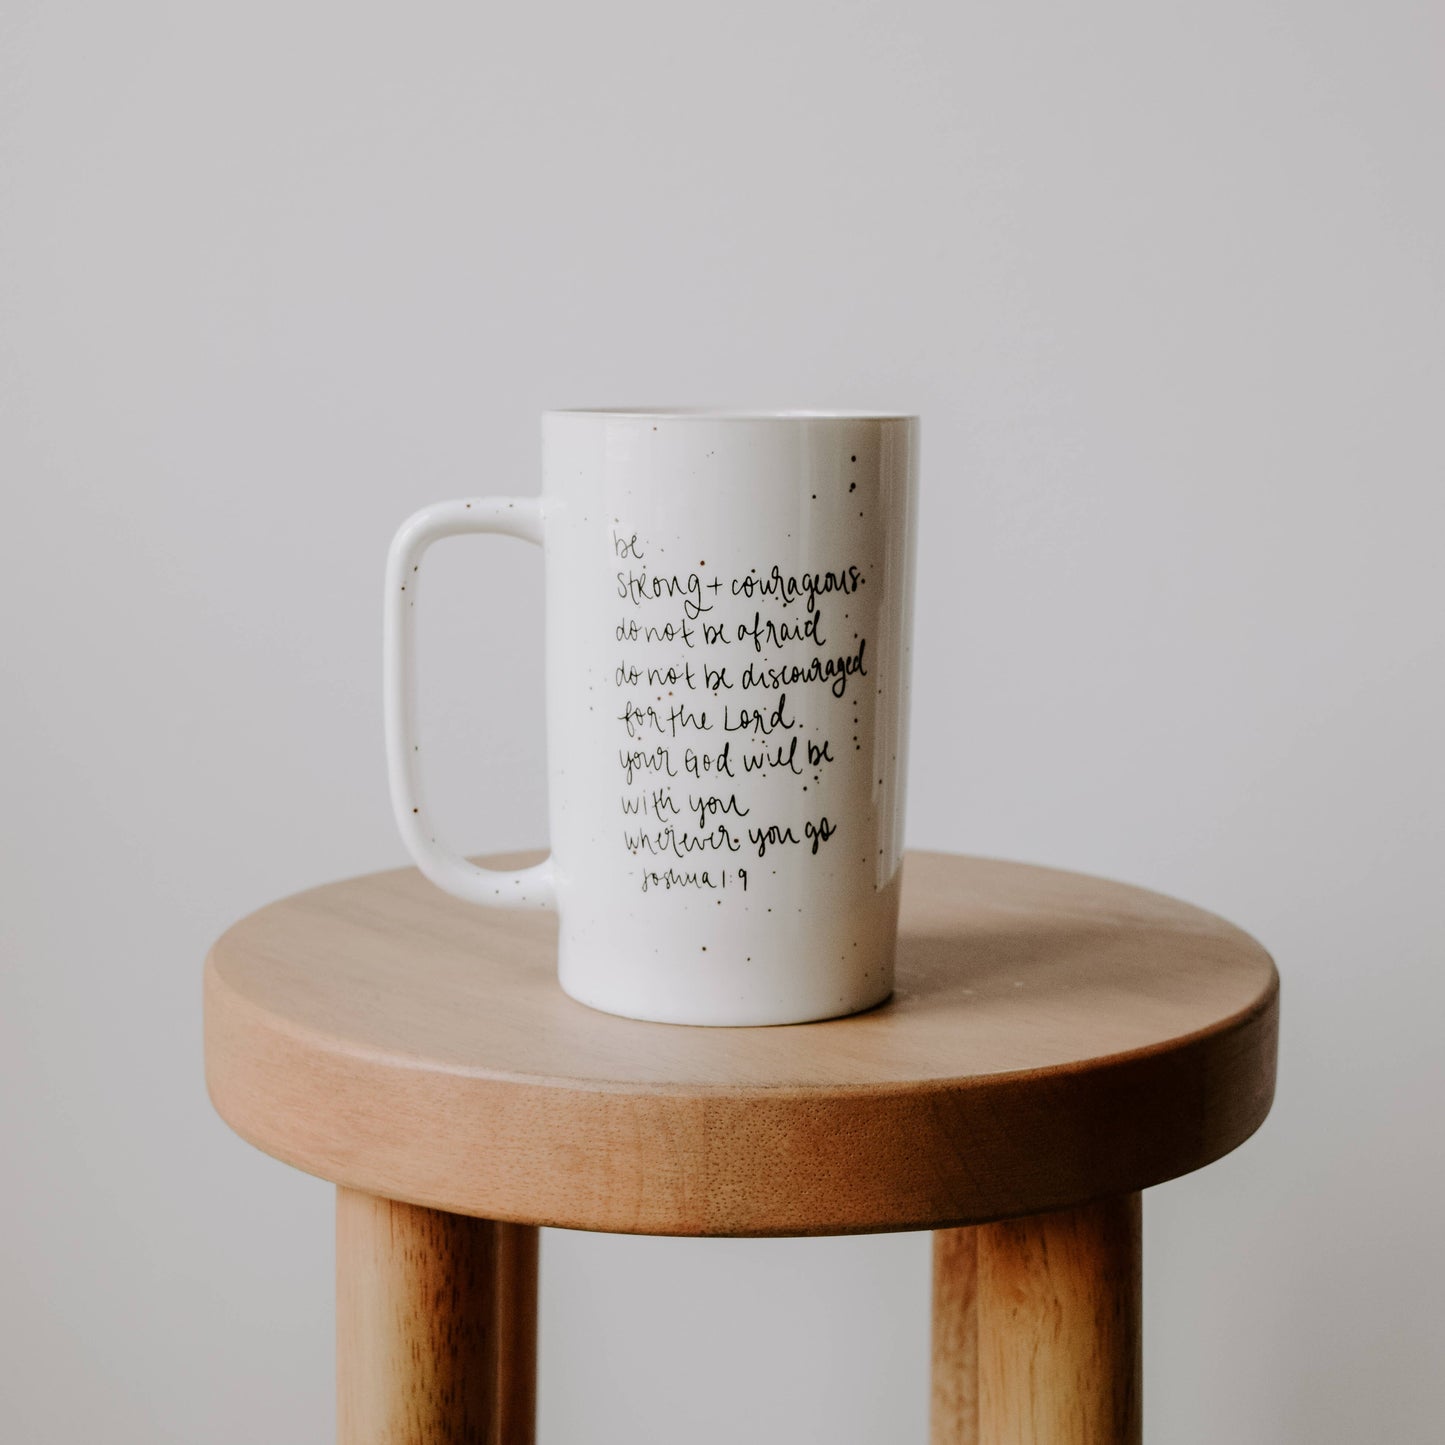 Be Strong and Courageous Coffee Mug - Gifts & Home Decor